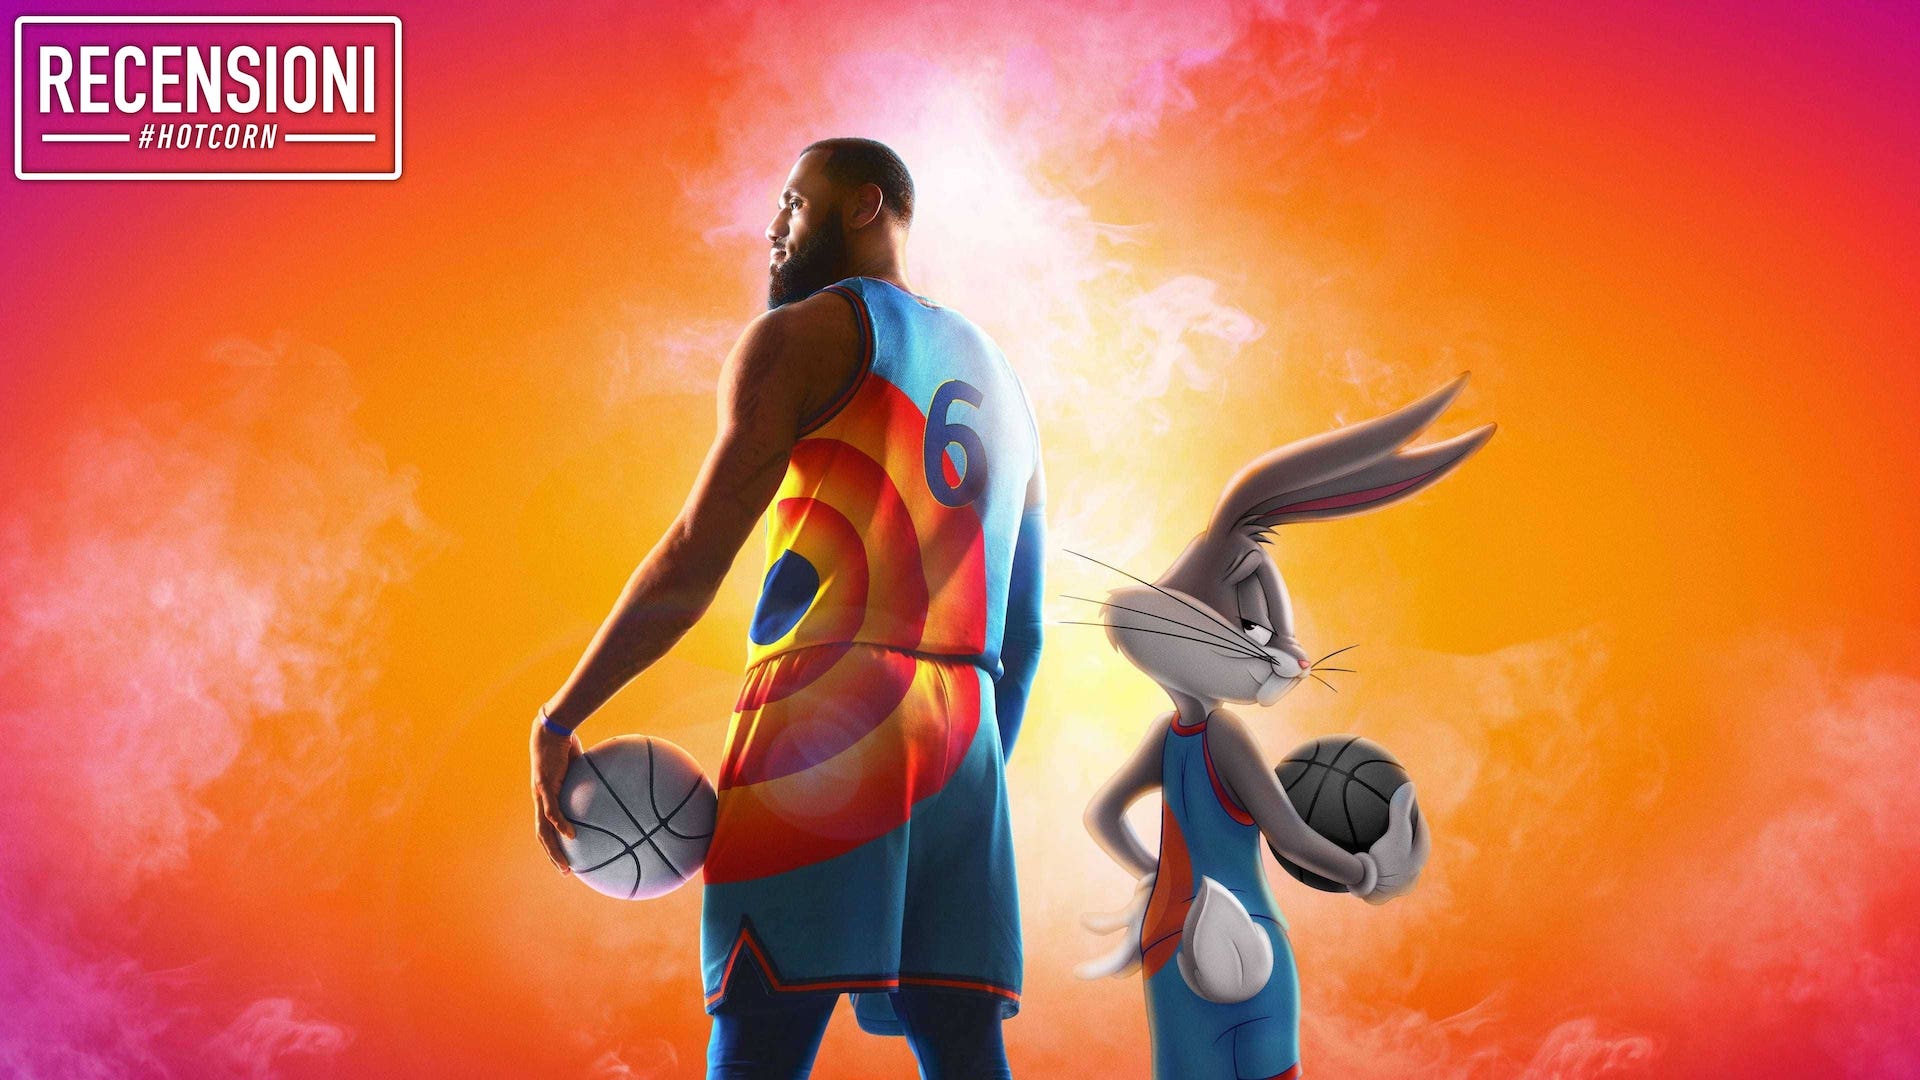 Space Jam: New Legends |  Movie review with LeBron James